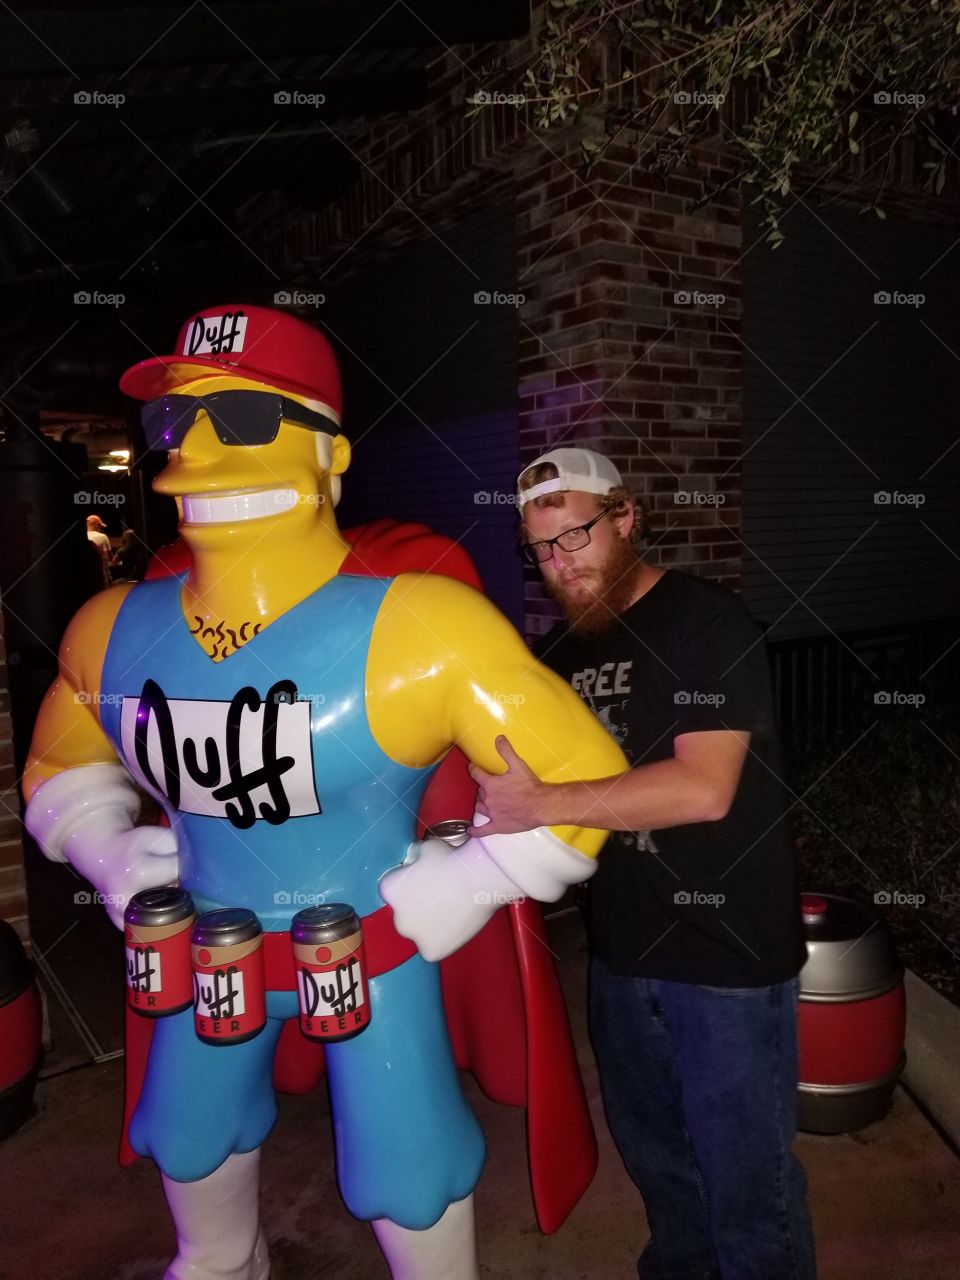 A candid picture of Duffman at Universal Studios Orlando FL